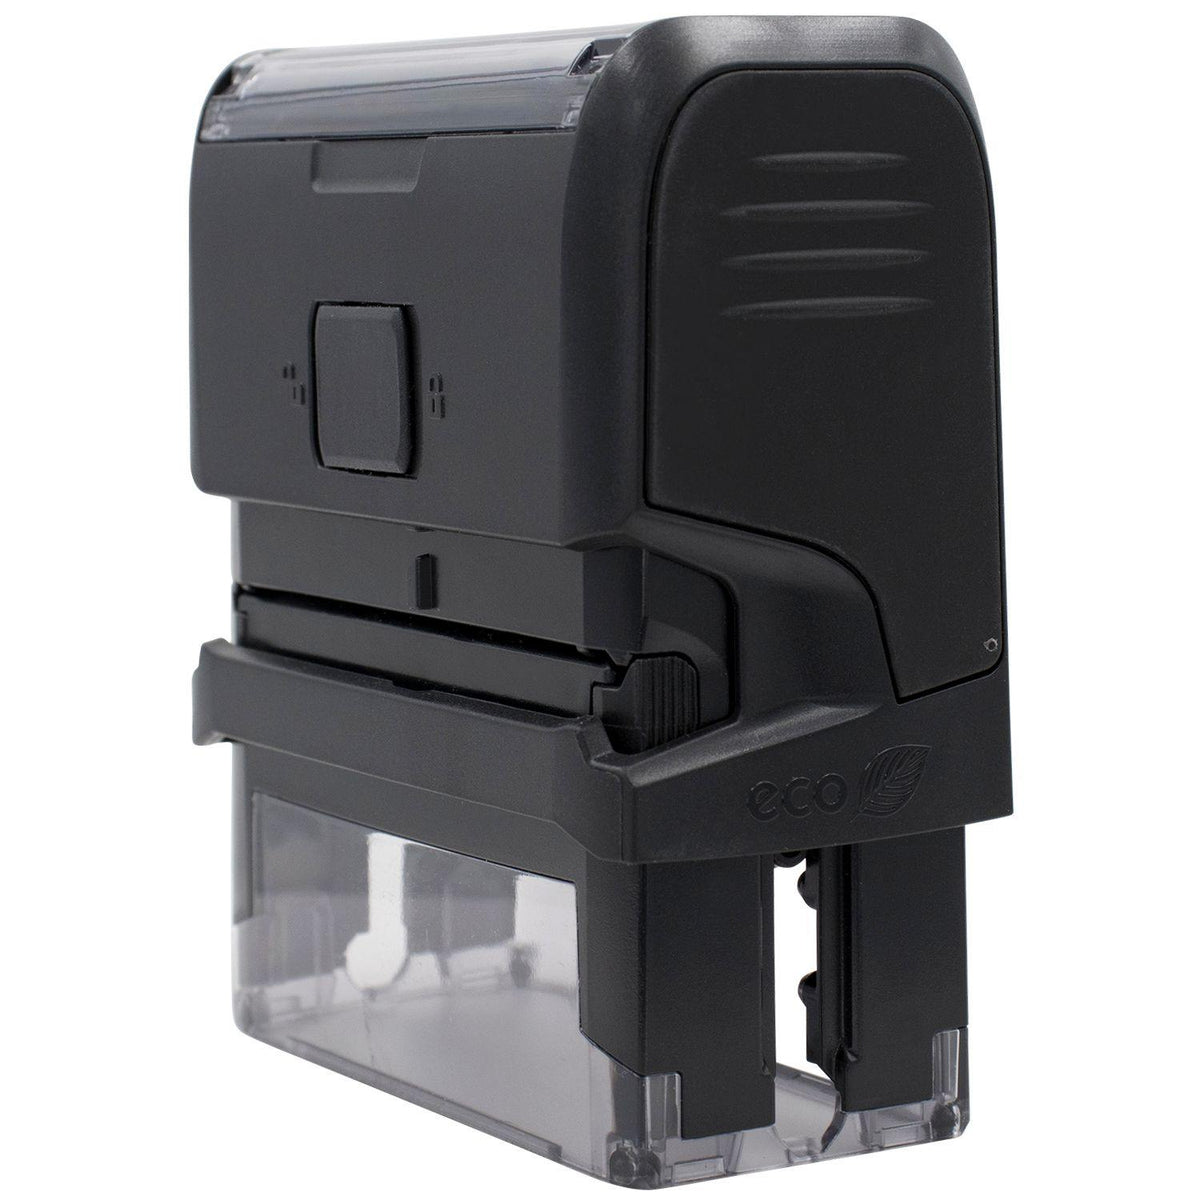 Self-Inking Bold Draft Stamp - Engineer Seal Stamps - Brand_Trodat, Impression Size_Small, Stamp Type_Self-Inking Stamp, Type of Use_General, Type of Use_Office